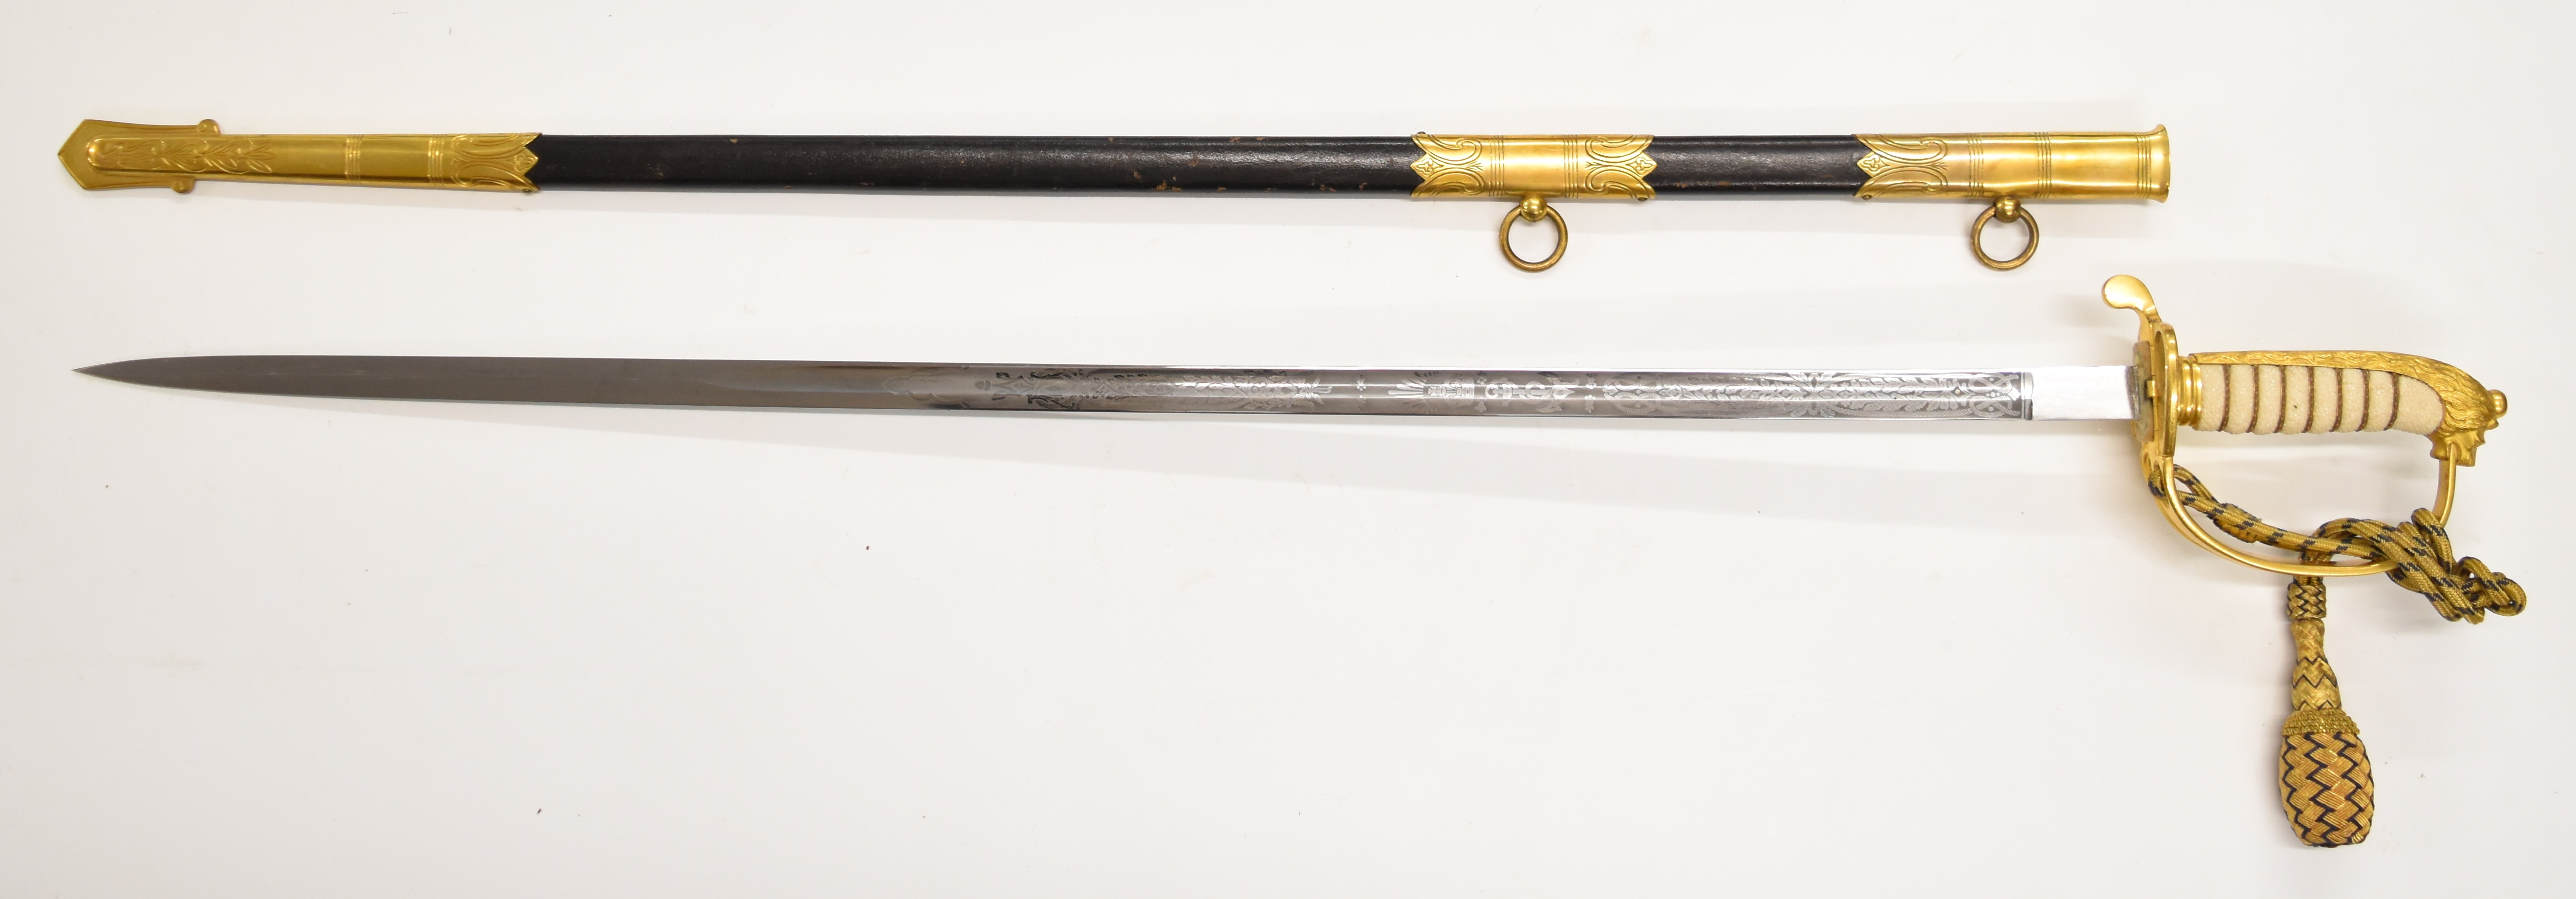 Royal Navy 1827 pattern officer's dress sword with lion head pommel, folding guard, fouled anchor - Image 2 of 10